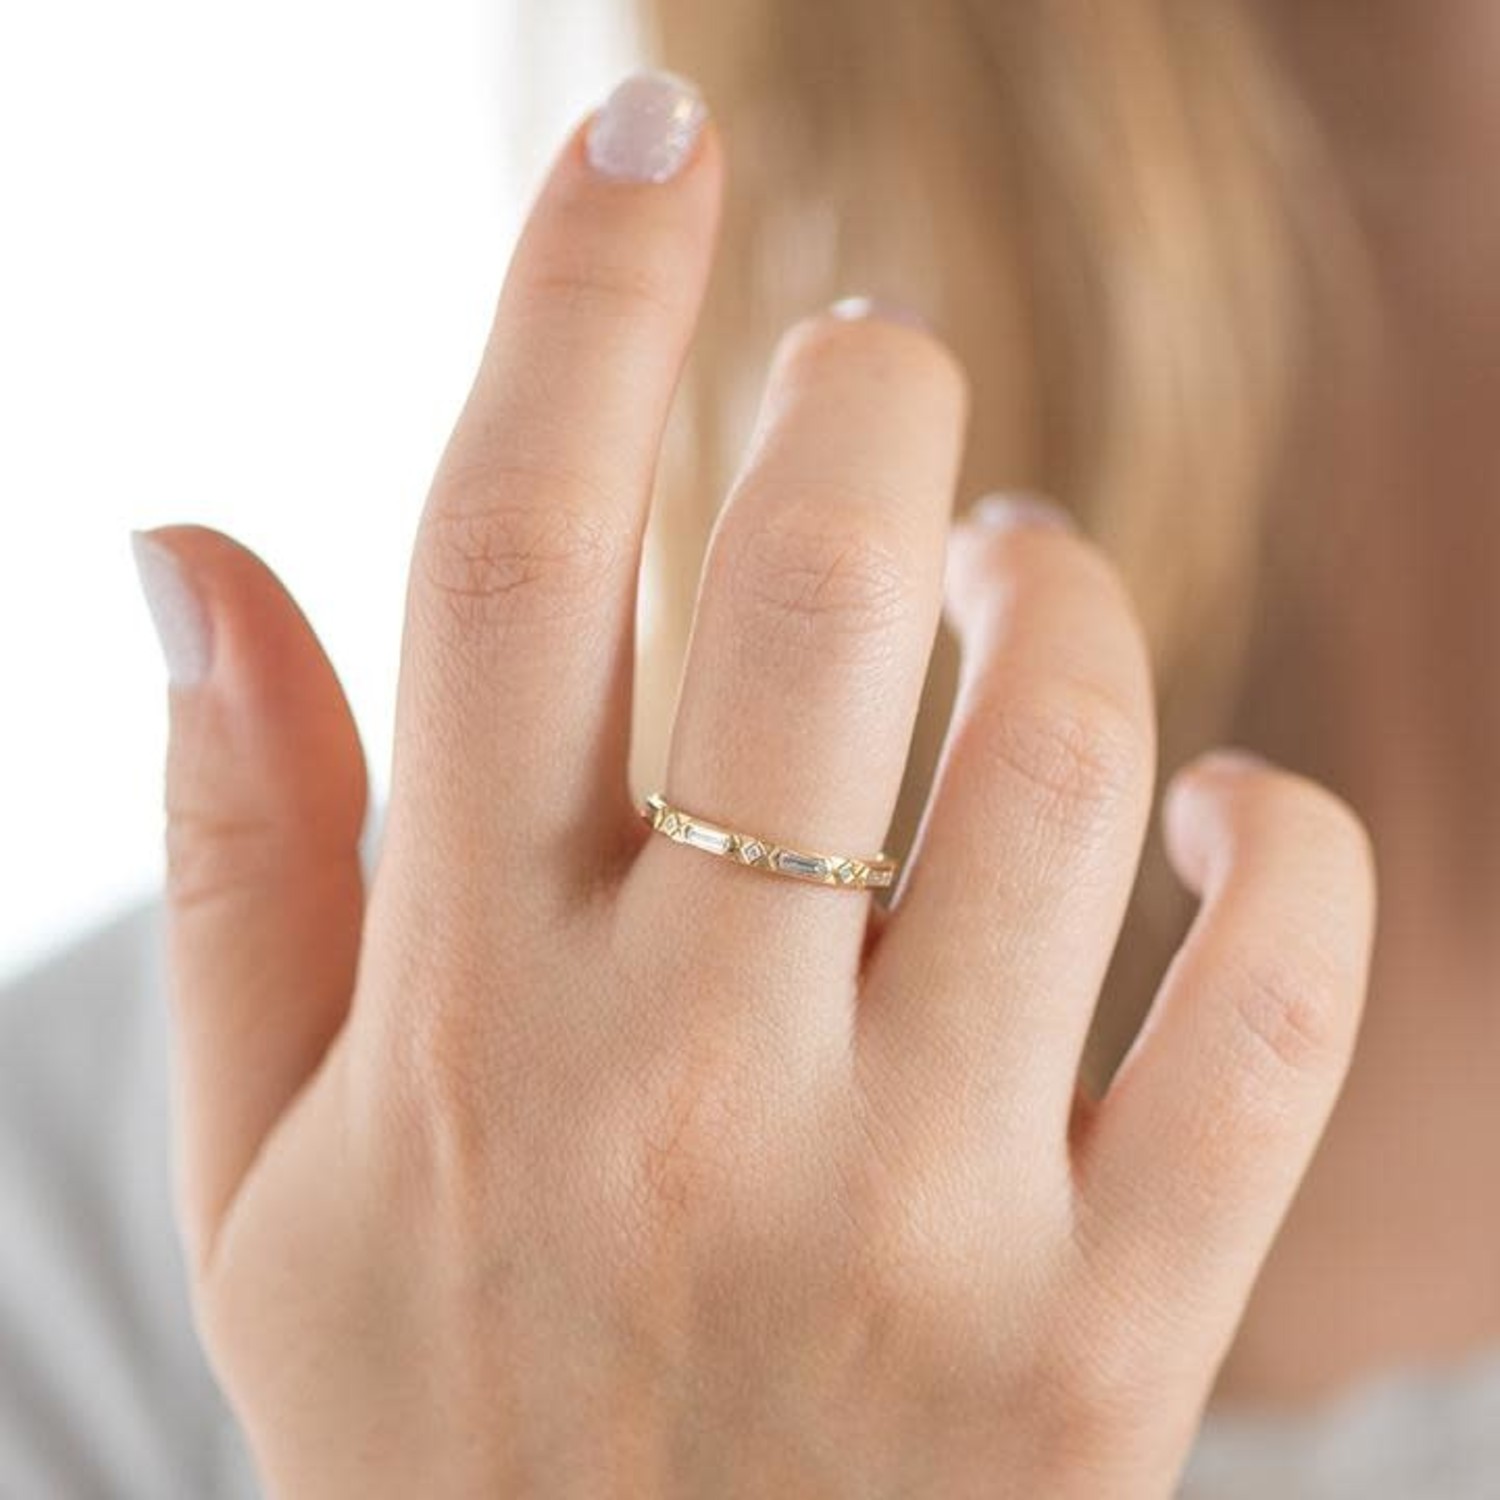 The Unique and Geometric - A Set of Golden Wedding Bands